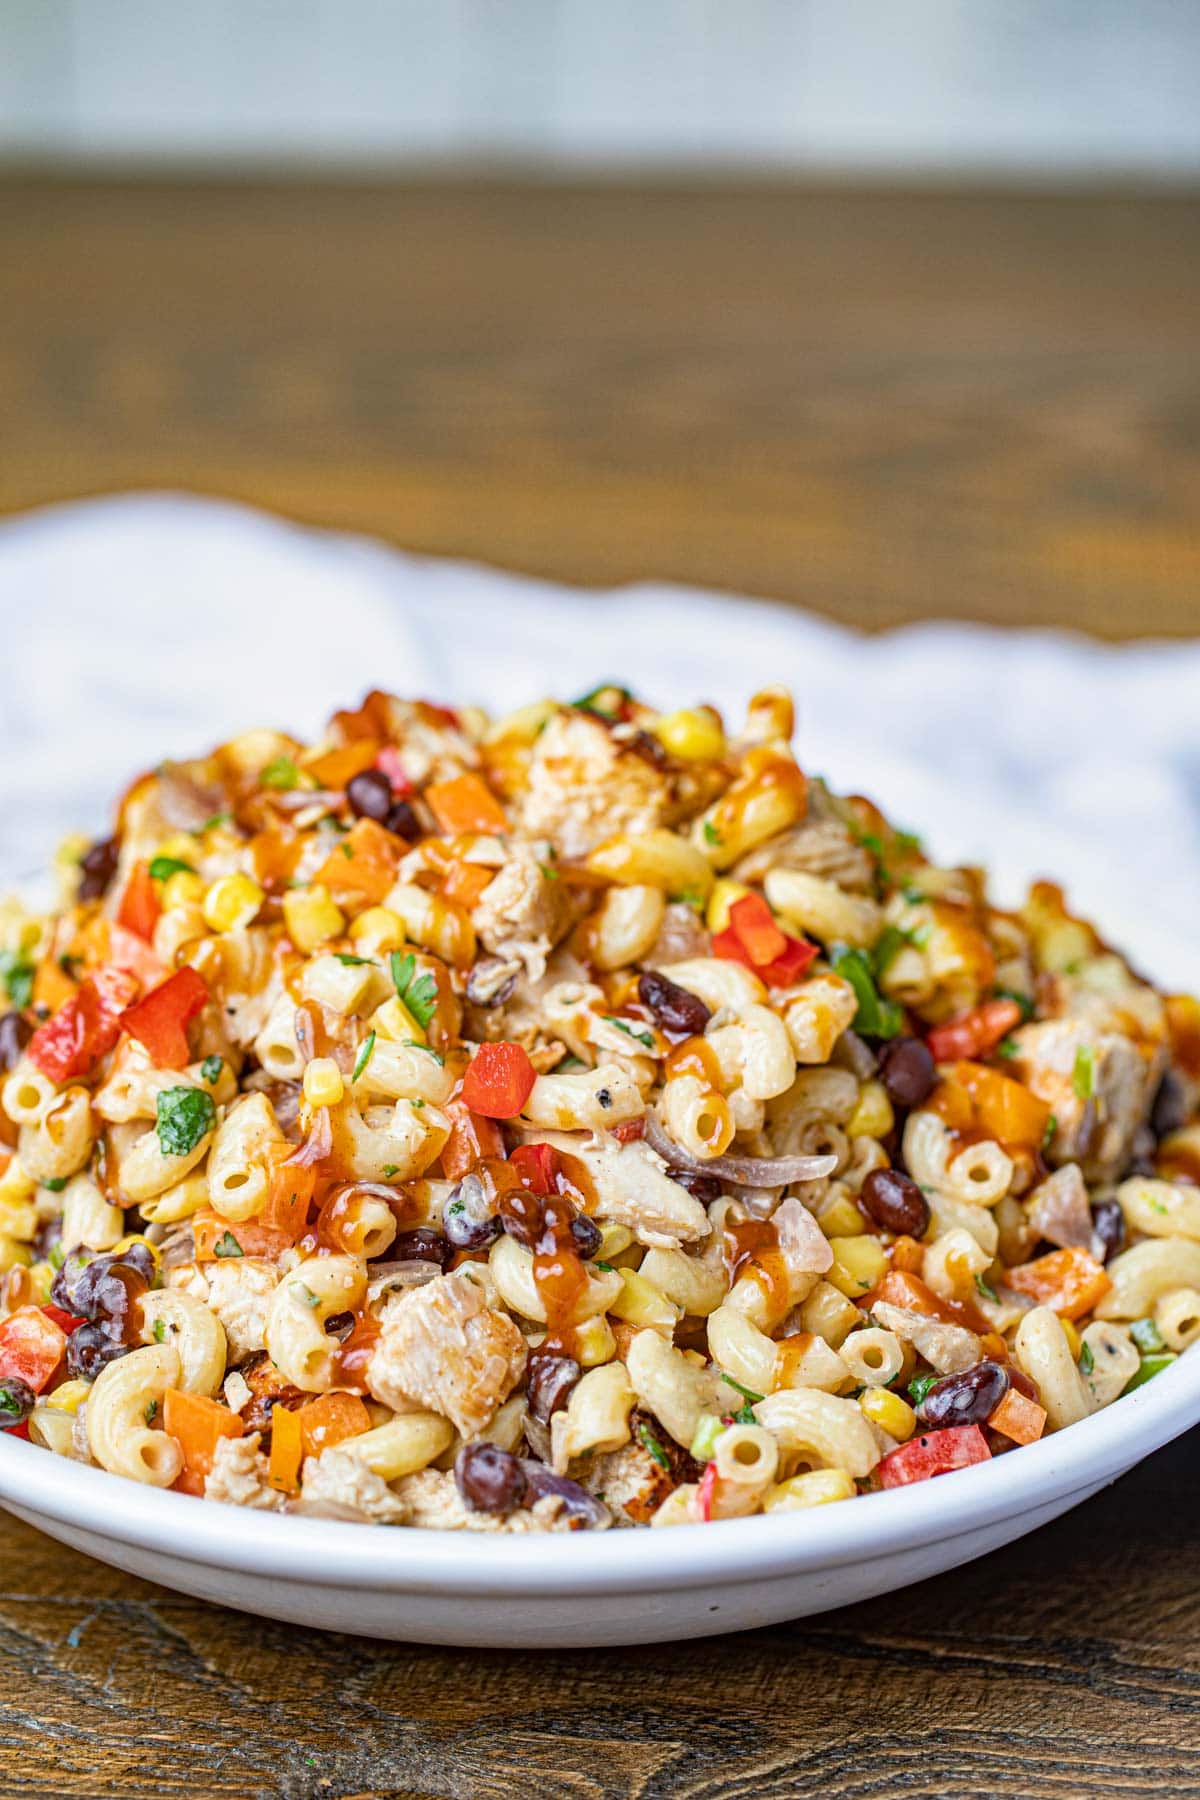 Bowl of Pasta Salad with Chicken, Corn and Beans